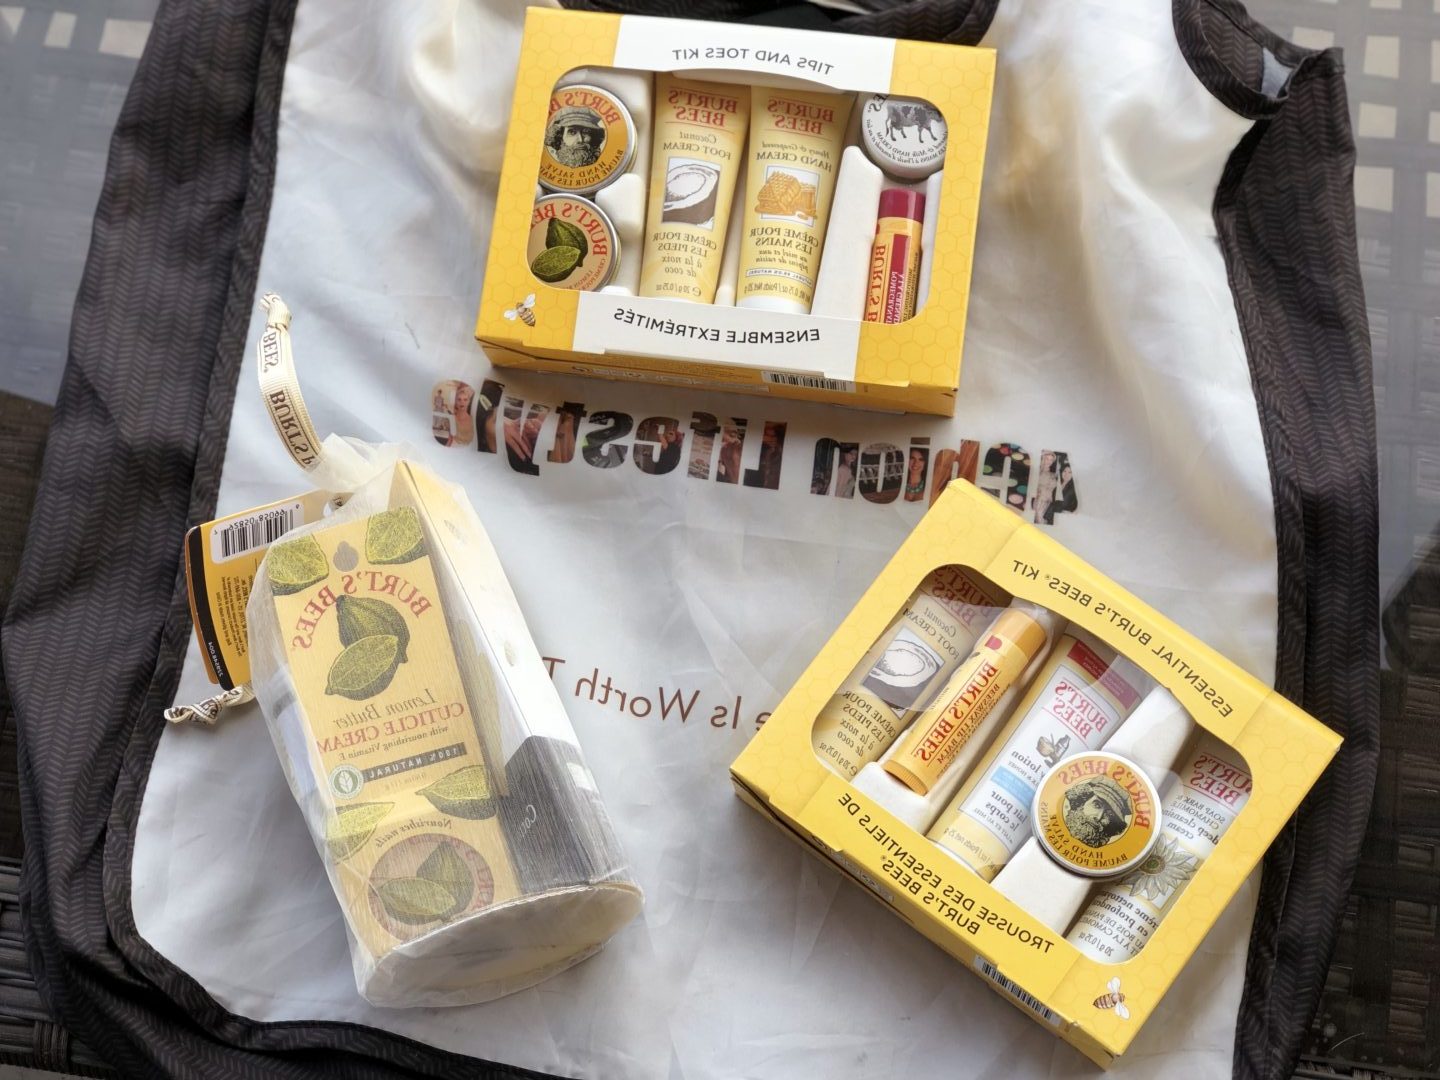 Burt's Bees hands and feet crare wintertime 4chion lifestyle